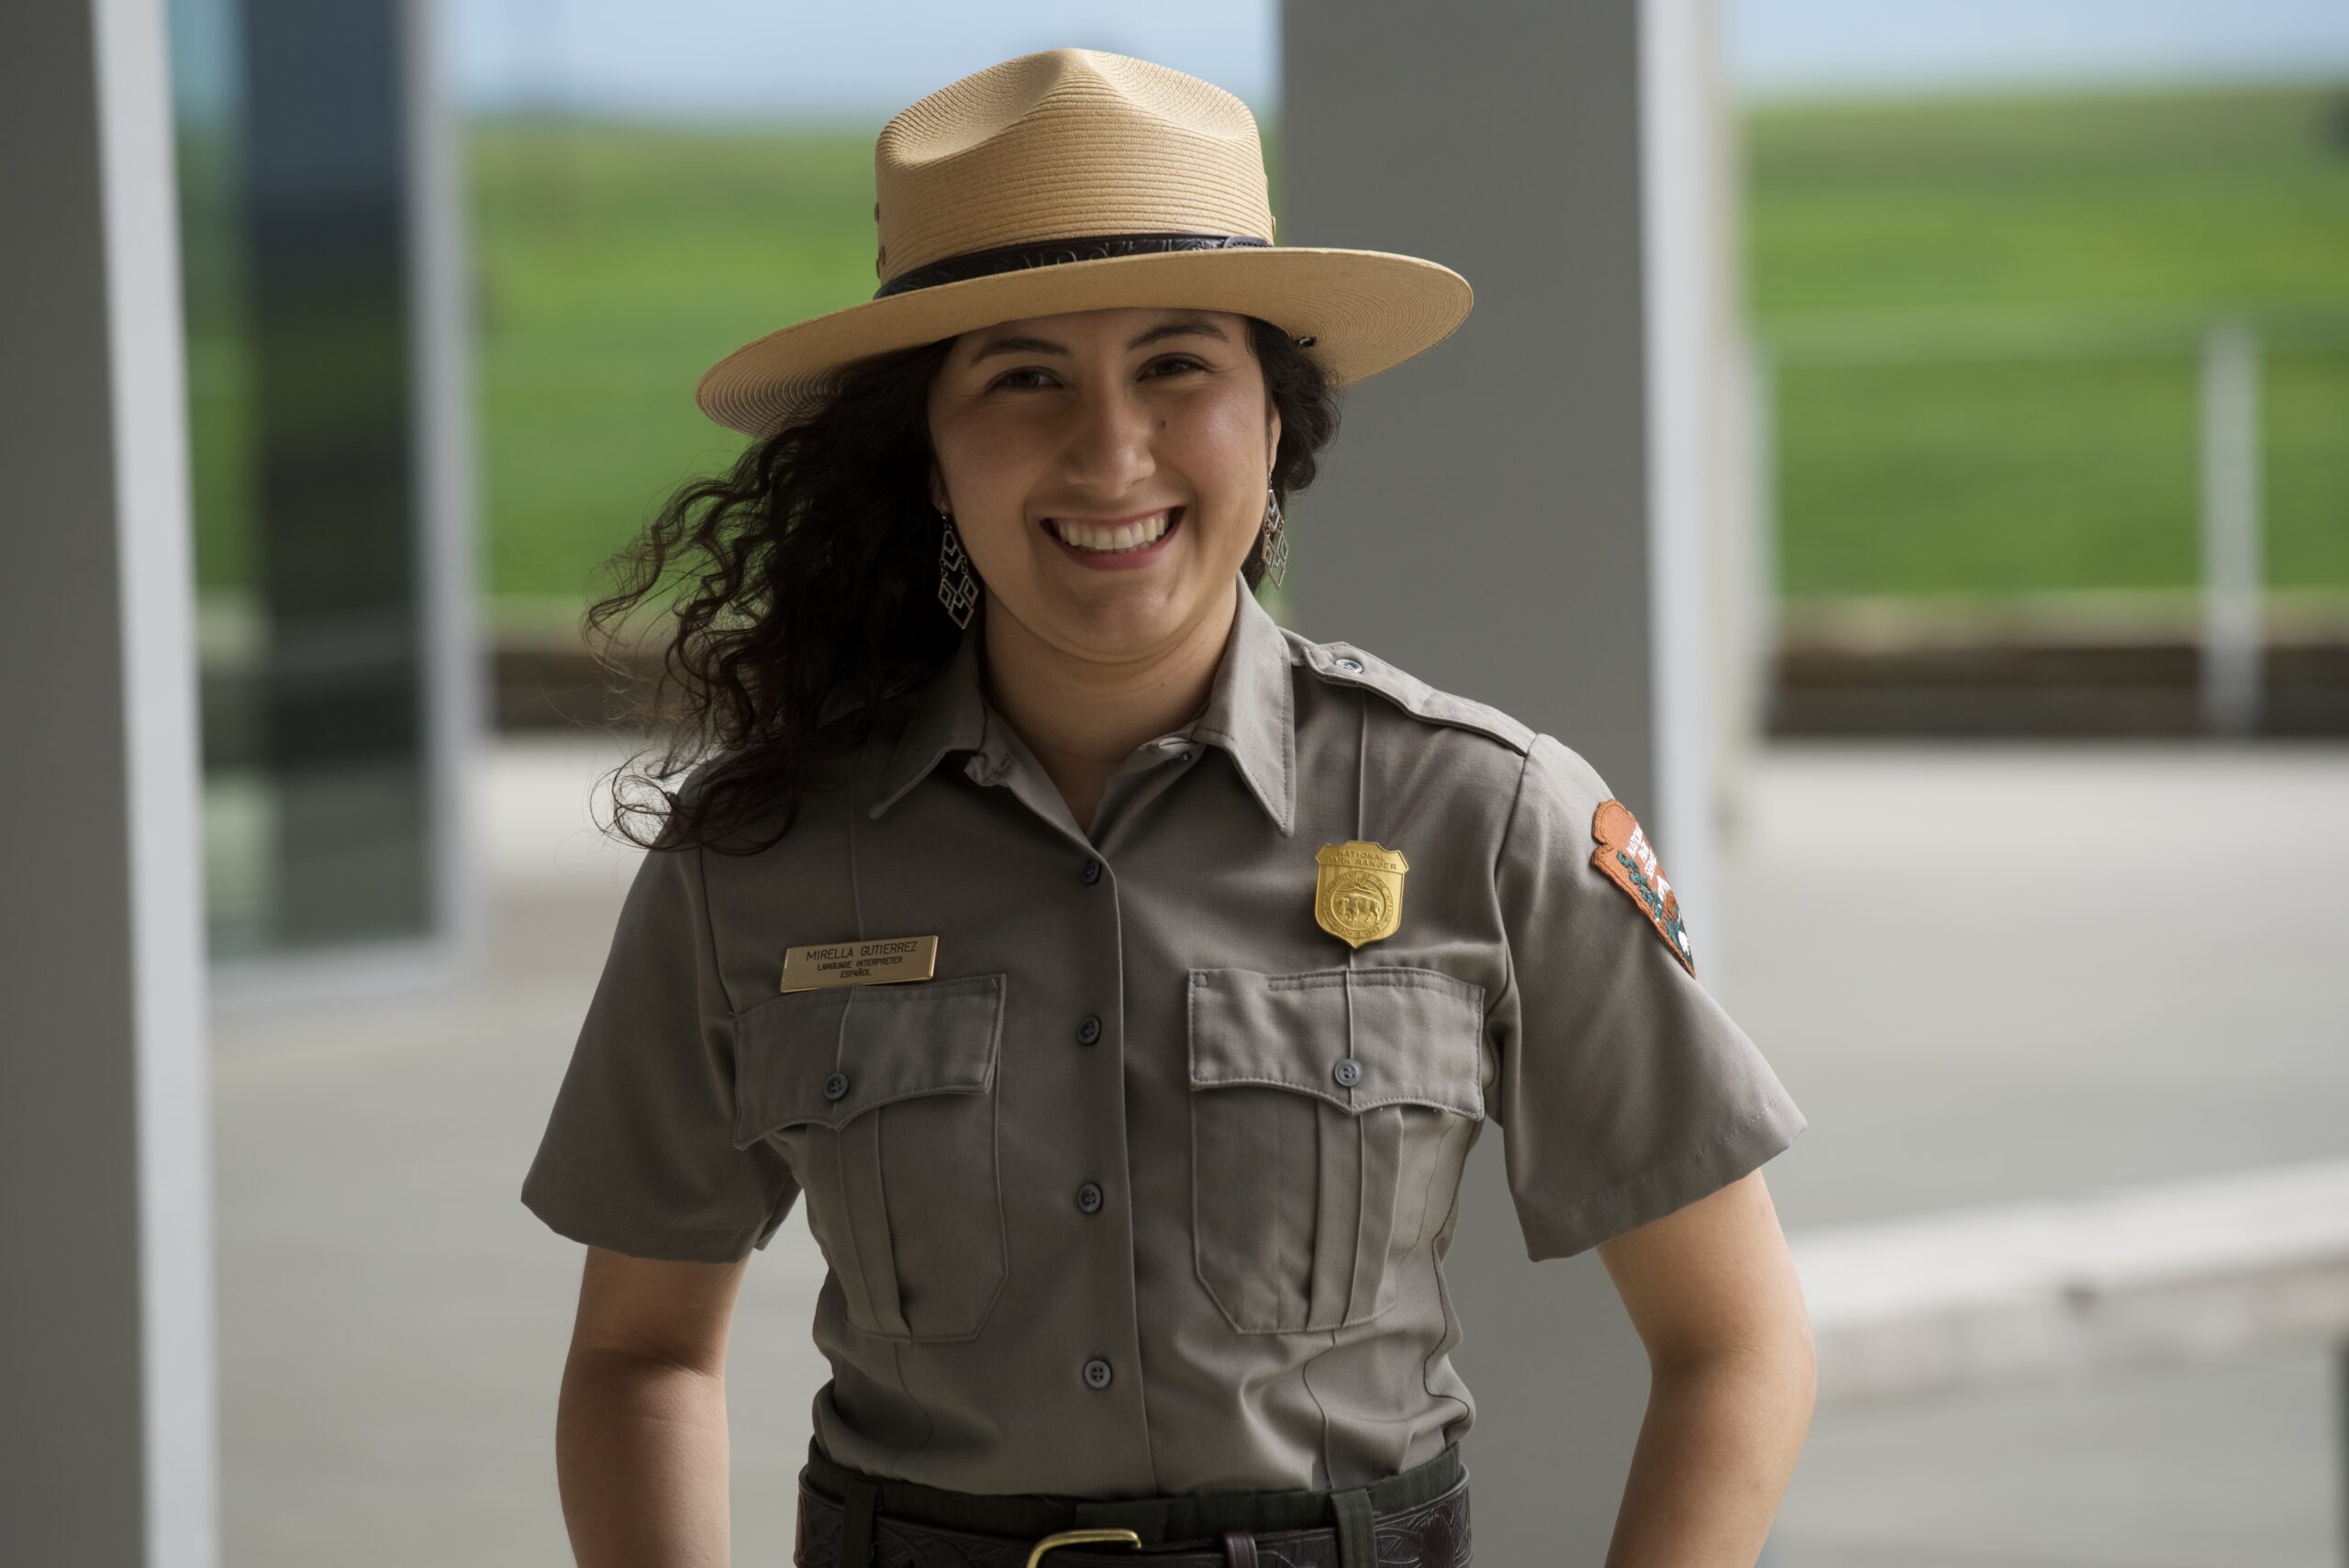 Early photo of Mirella Gutierrez working for NPS after training in the Yosemite Leadership Program.